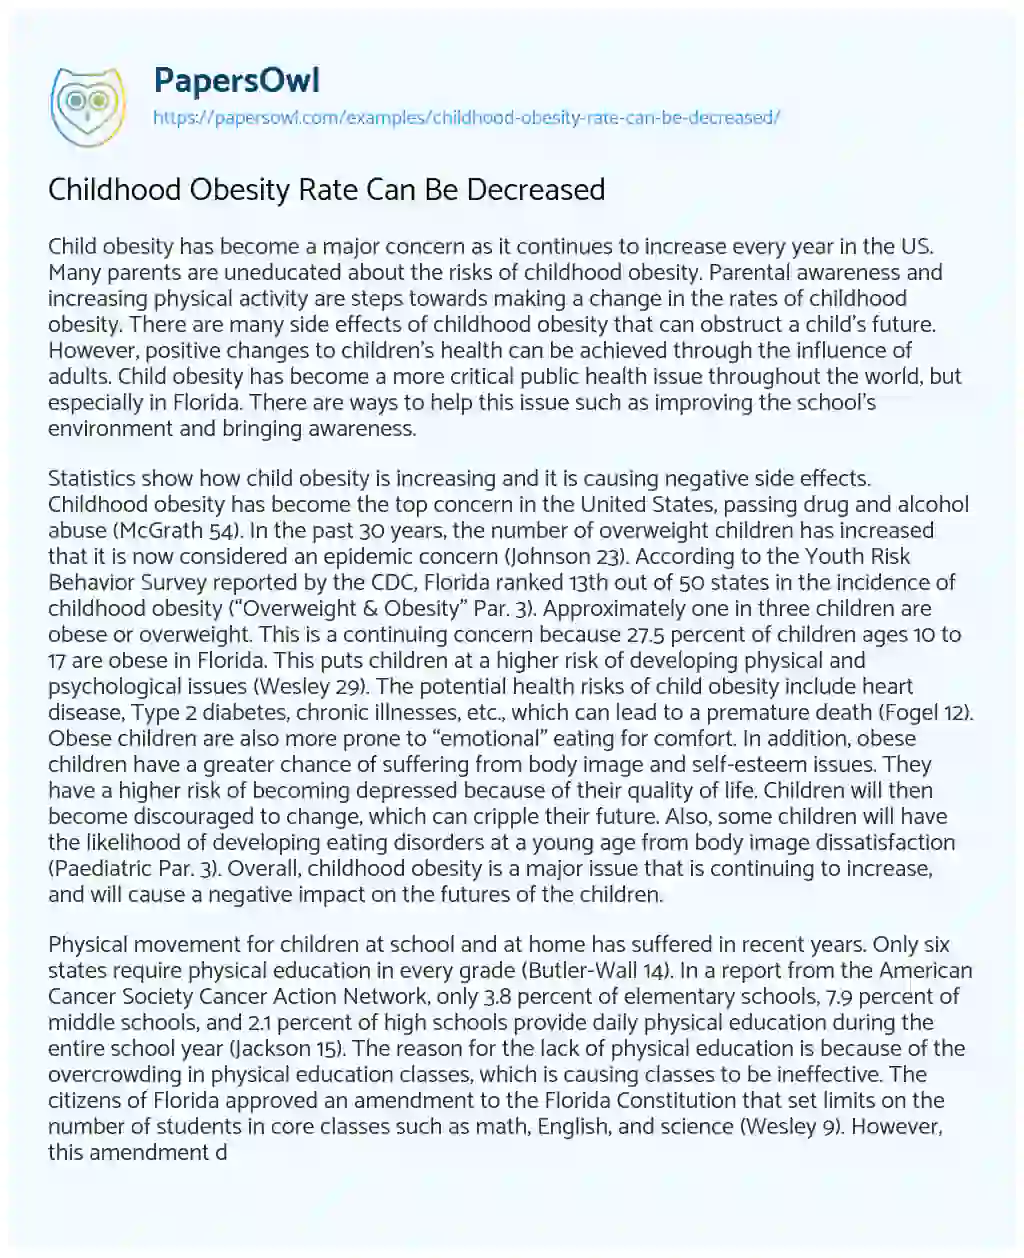 Essay on Childhood Obesity Rate Can be Decreased